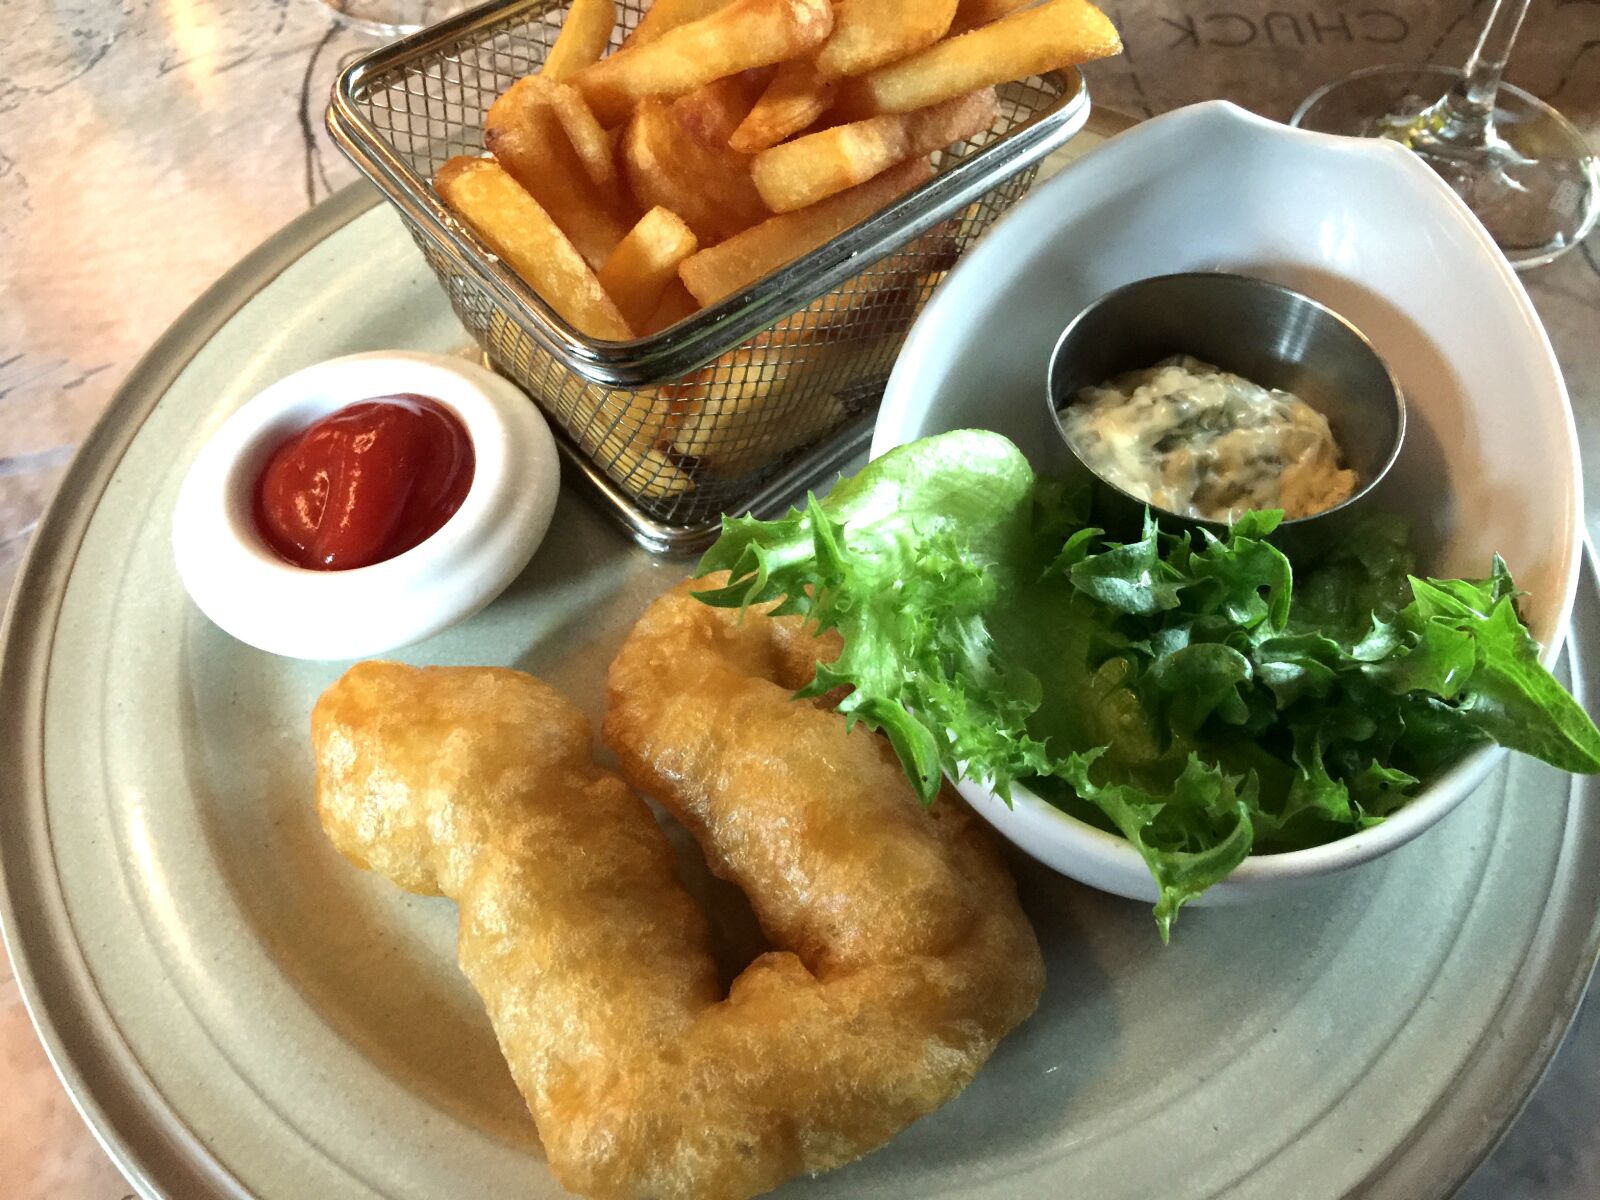 Apple iPhone 6 Plus sample photo. Fish, chips, food photography